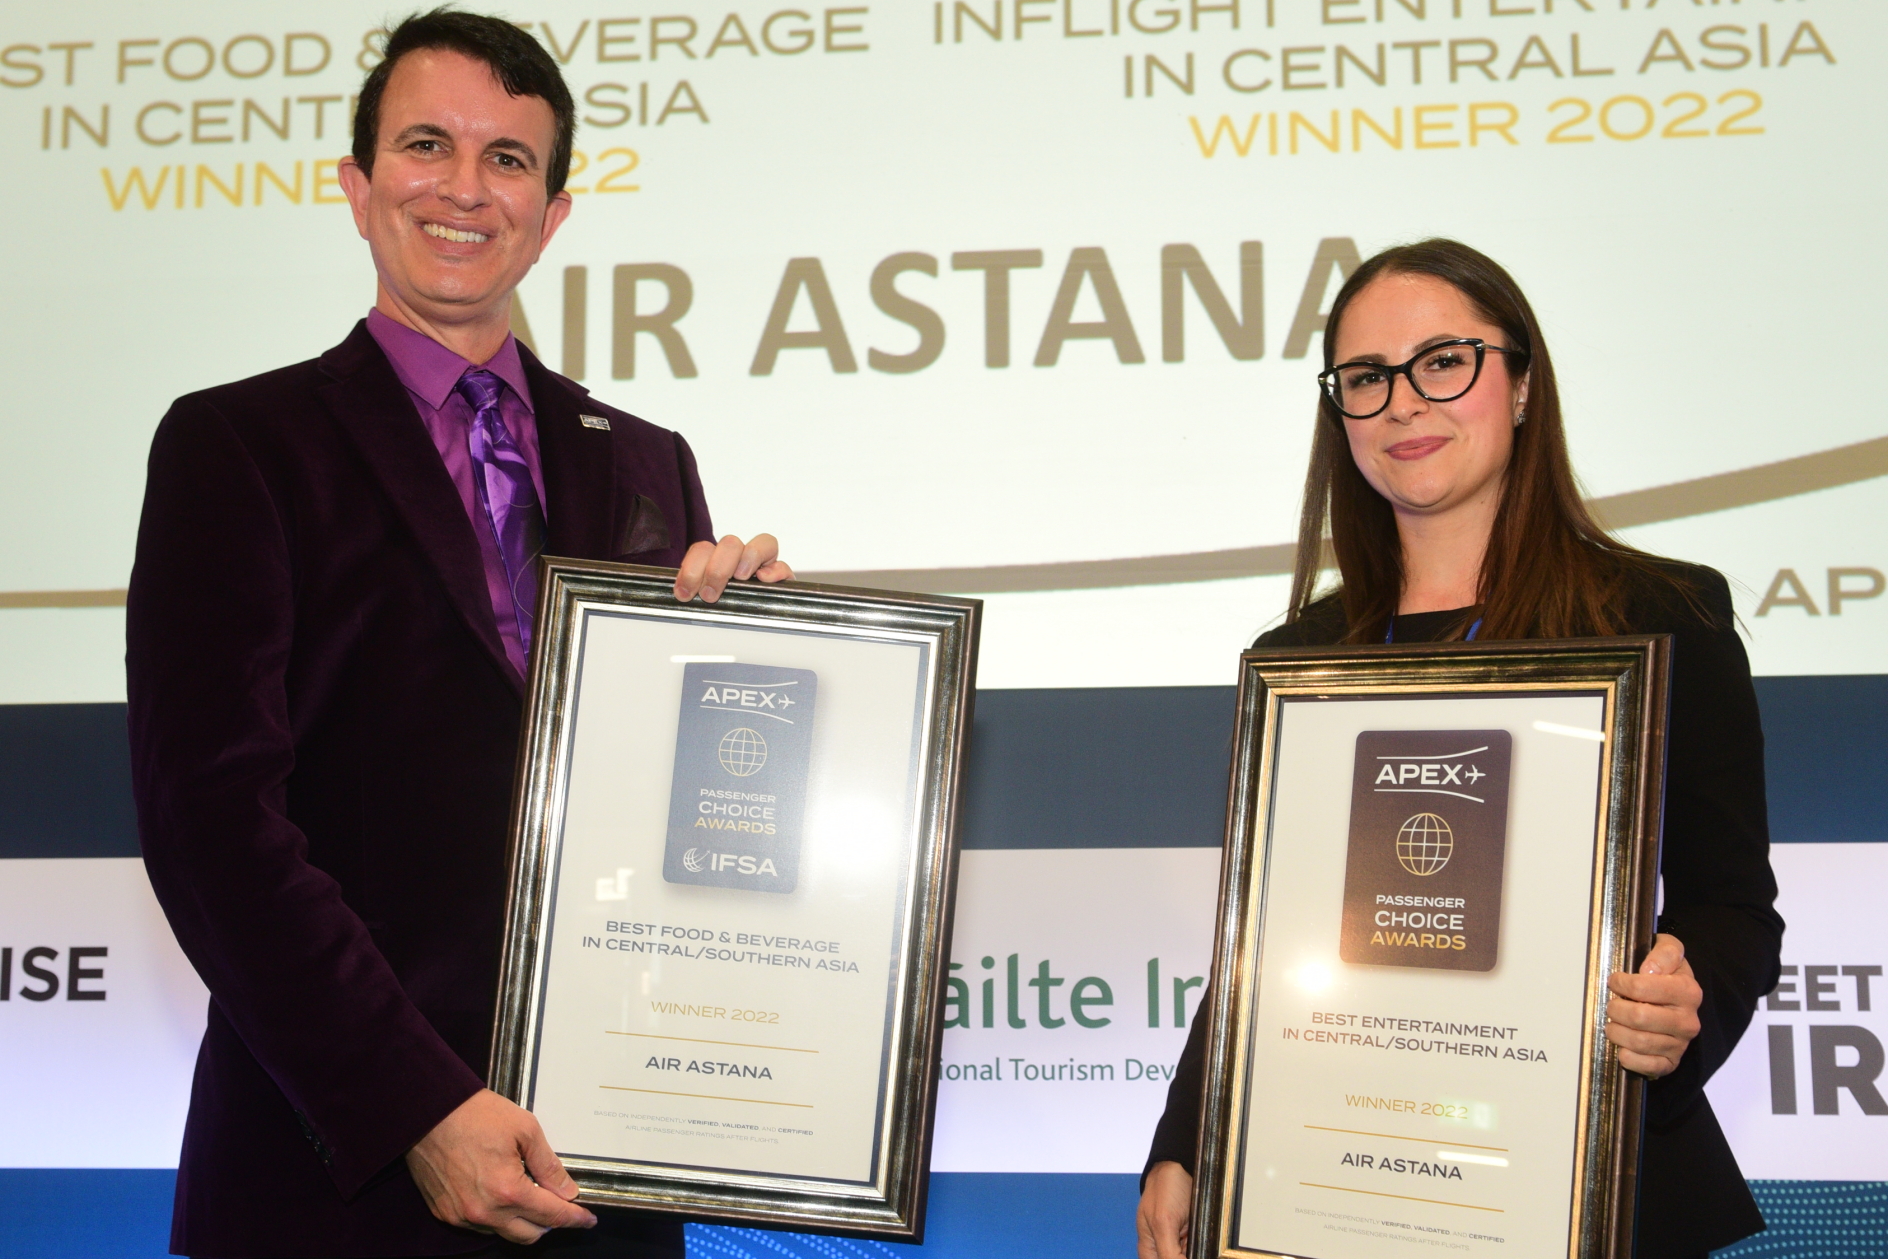 Dr. Joe Leader (left), CEO APEX and IFSA with Aida Khachatryan, IFE Supervisor, Air Astana. Click to enlarge.